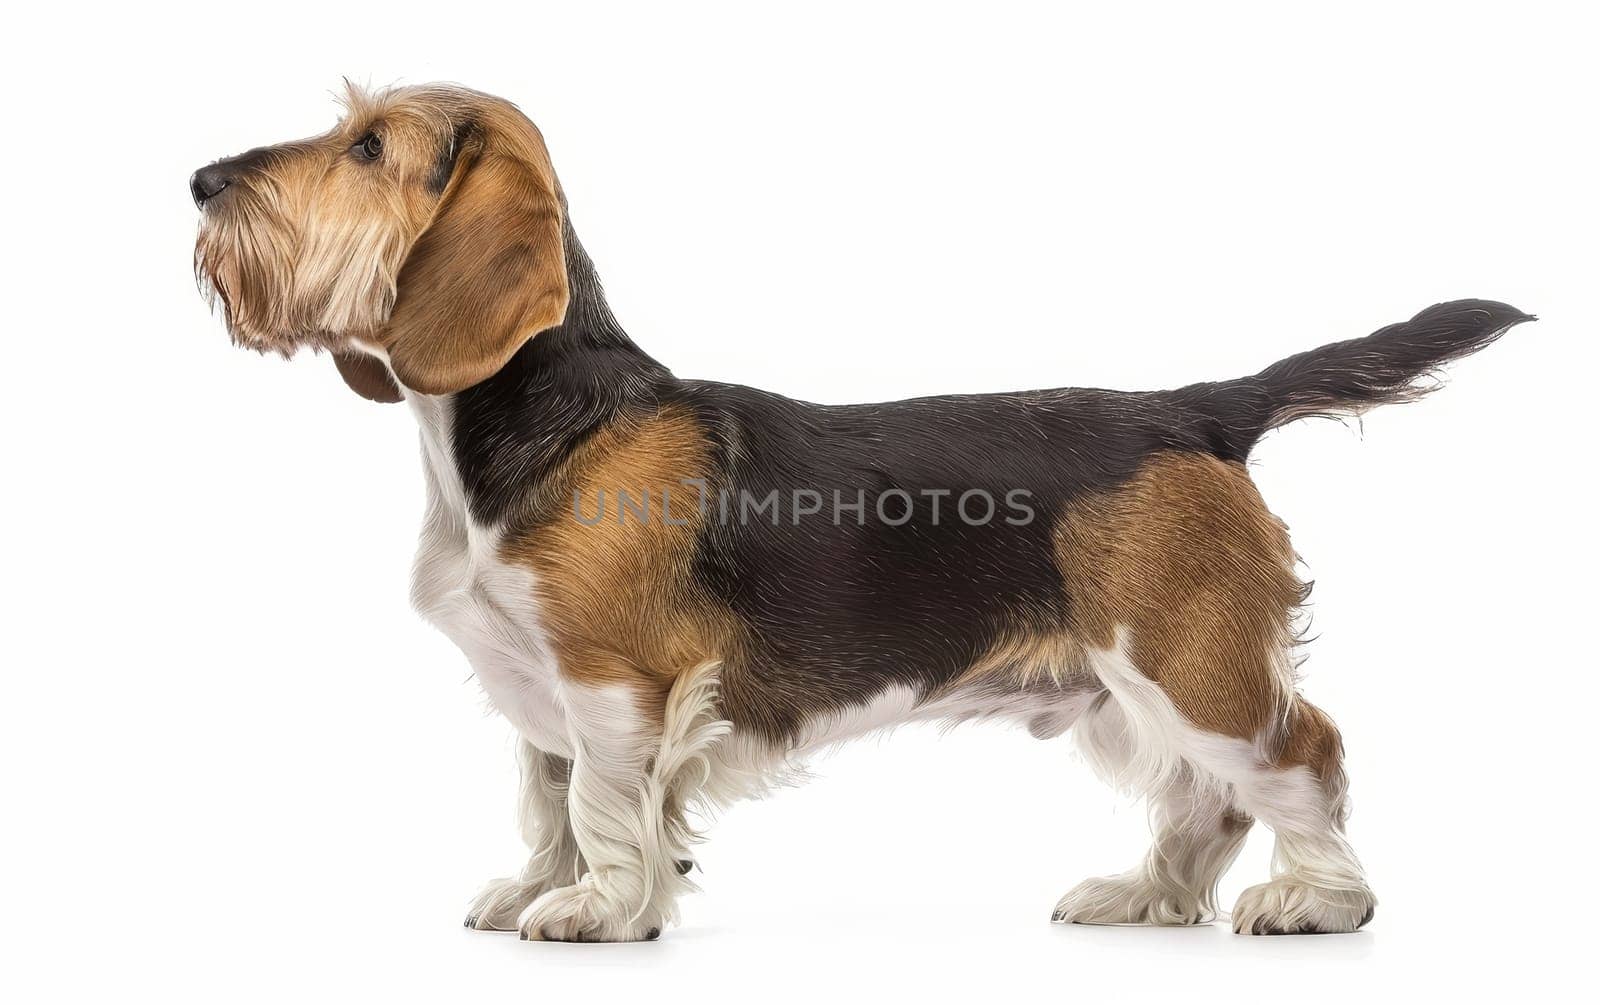 The tricolor Basset Griffon Vendeen displays its unique coat pattern. Its upright posture and attentive look reflect a keen awareness